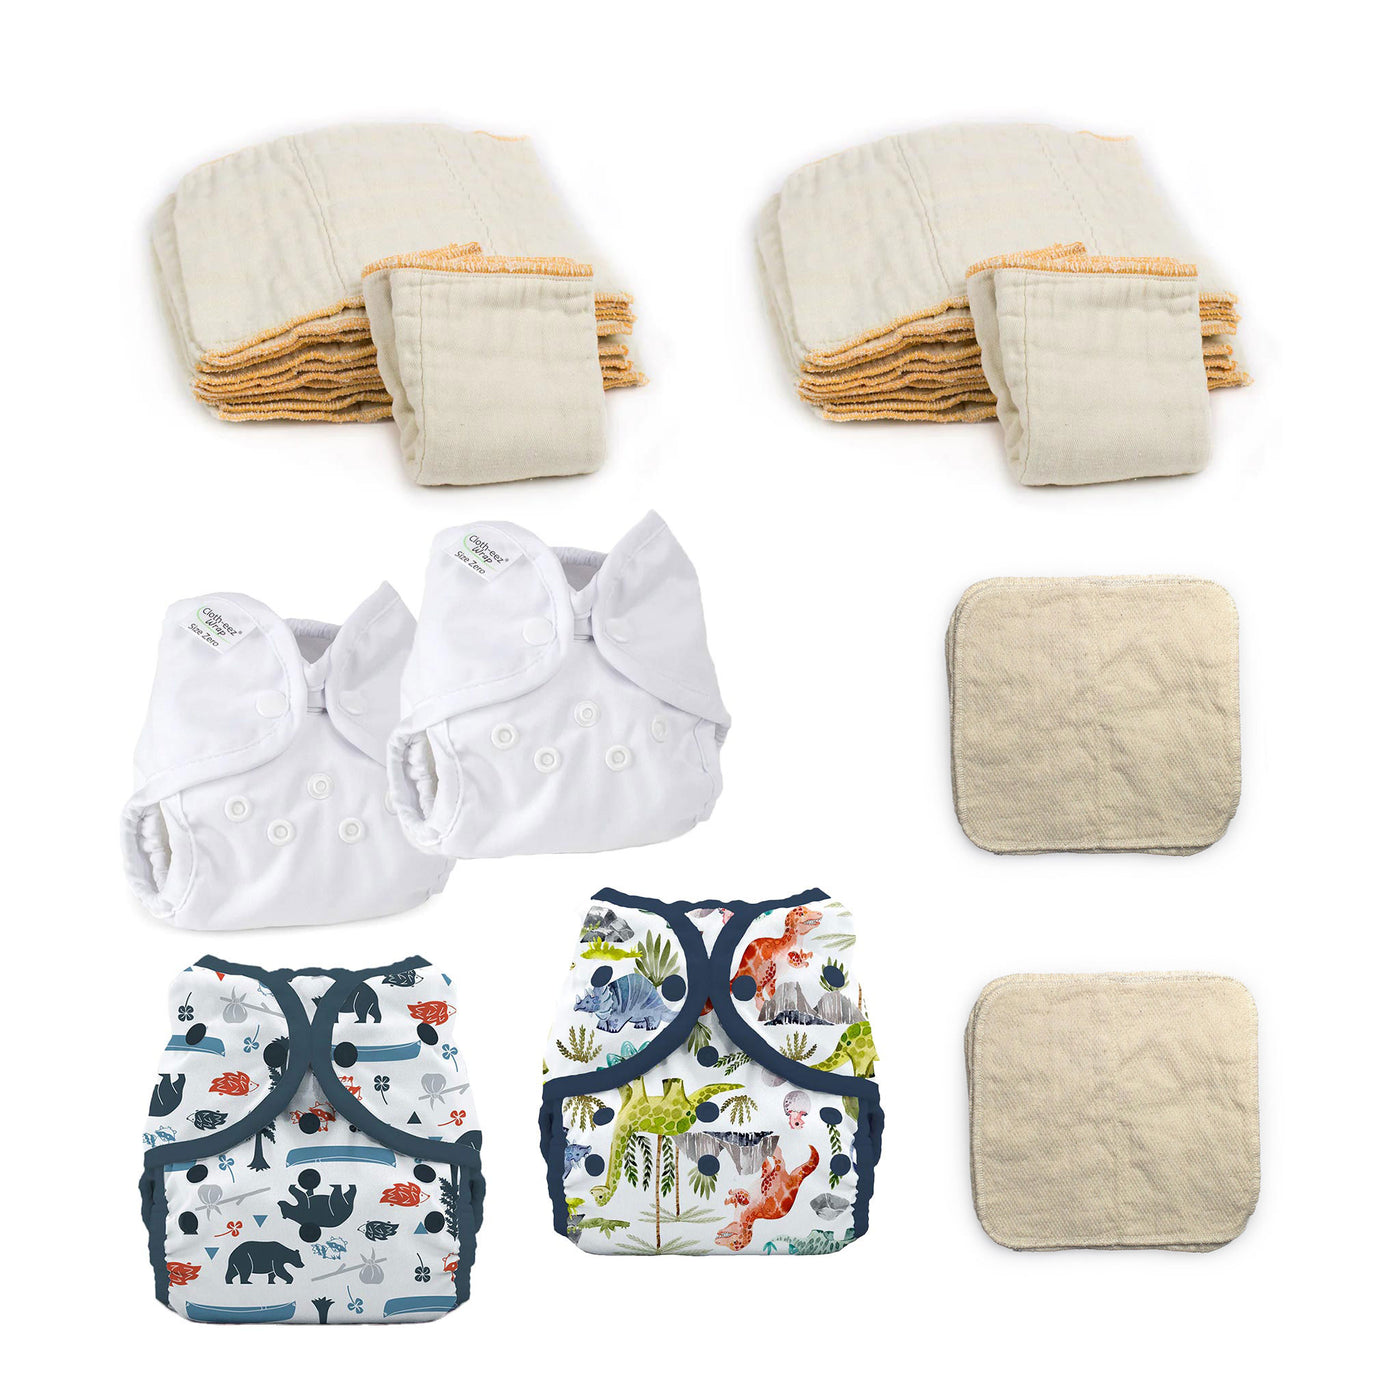 hello baby cloth diaper kit with organic diapers boy prints